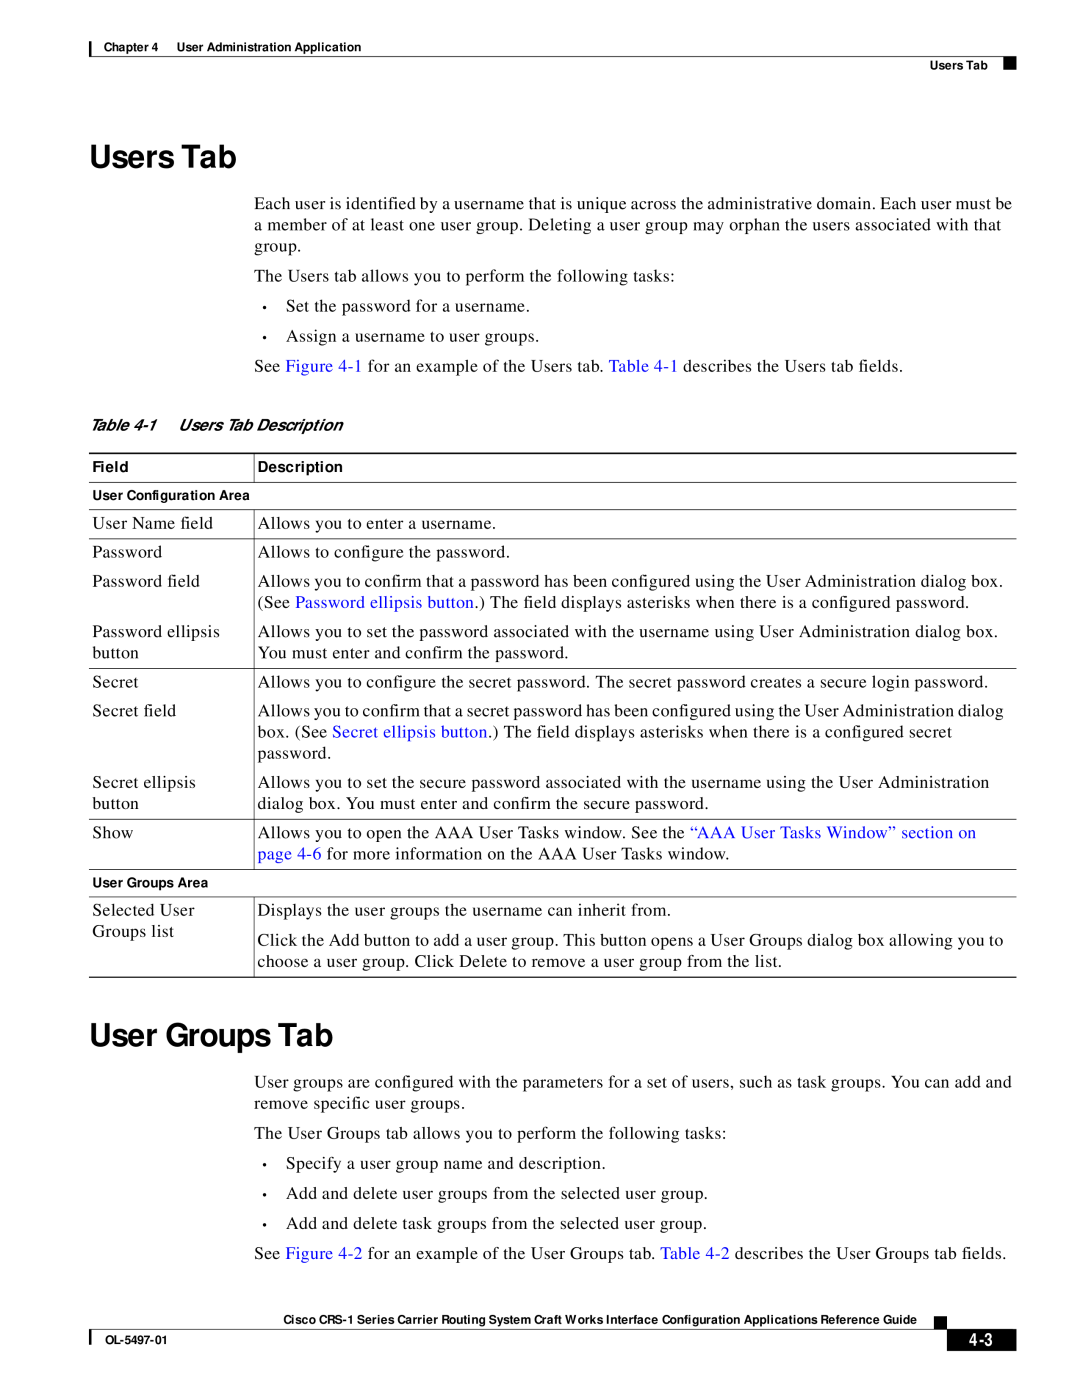 Cisco Systems CRS-1 Series manual Users Tab, User Groups Tab, Field, Description 